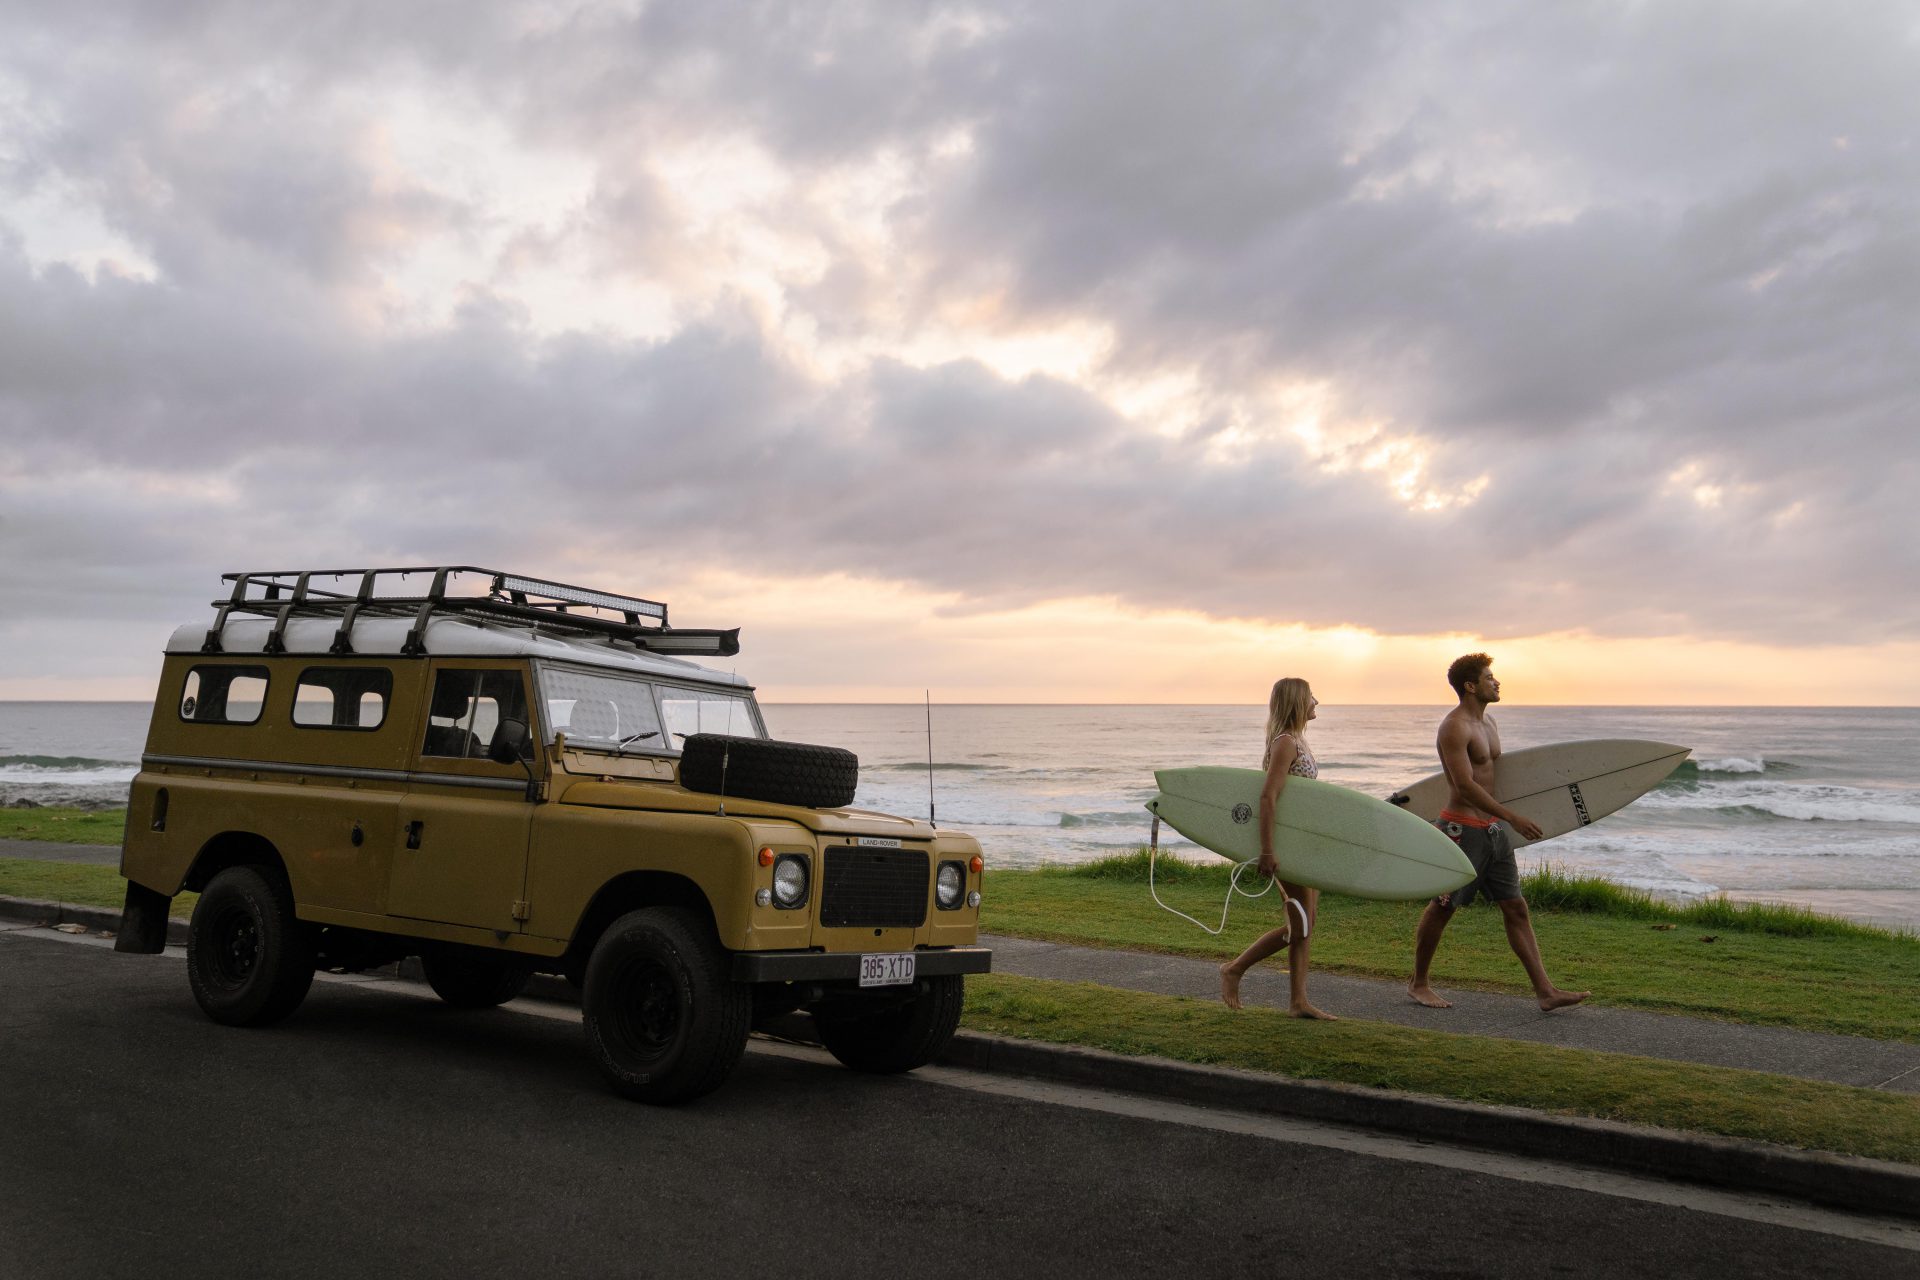 couple with surfboards retro landcruiser